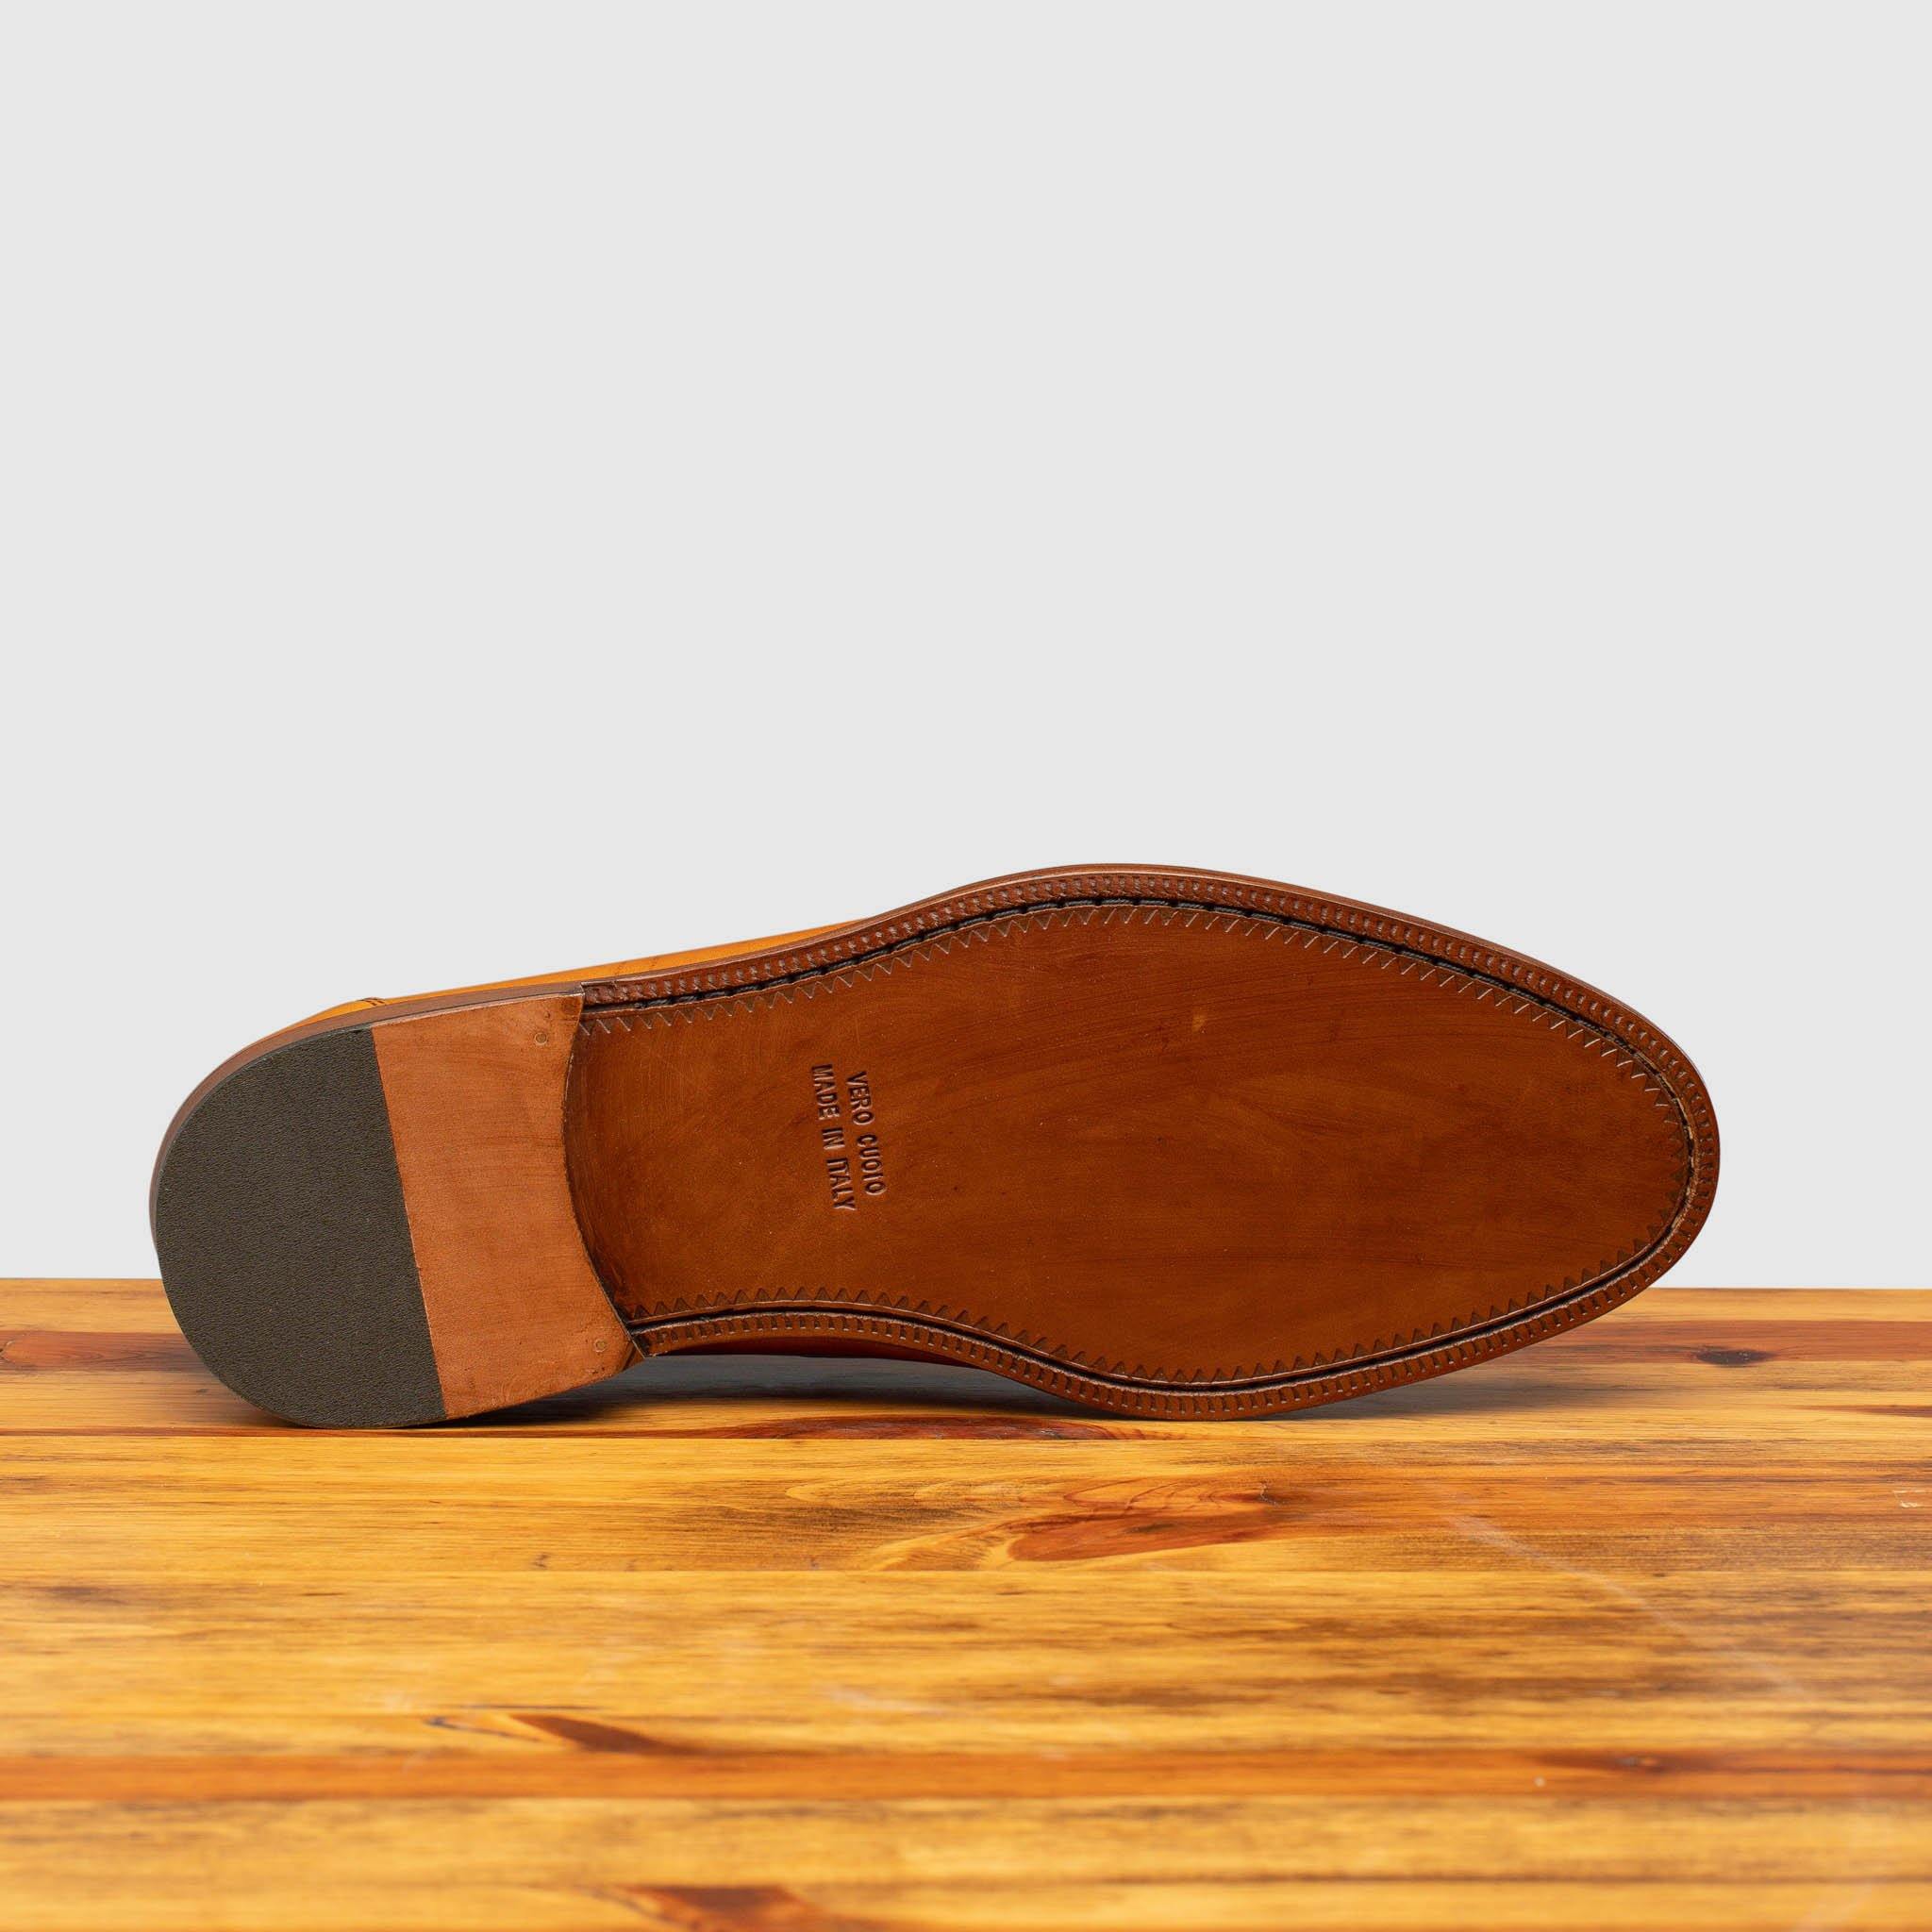 Full leather outsole of Calzoleria Toscana Santor Collegiate Loafer in Dark Caramel on top of a wooden table